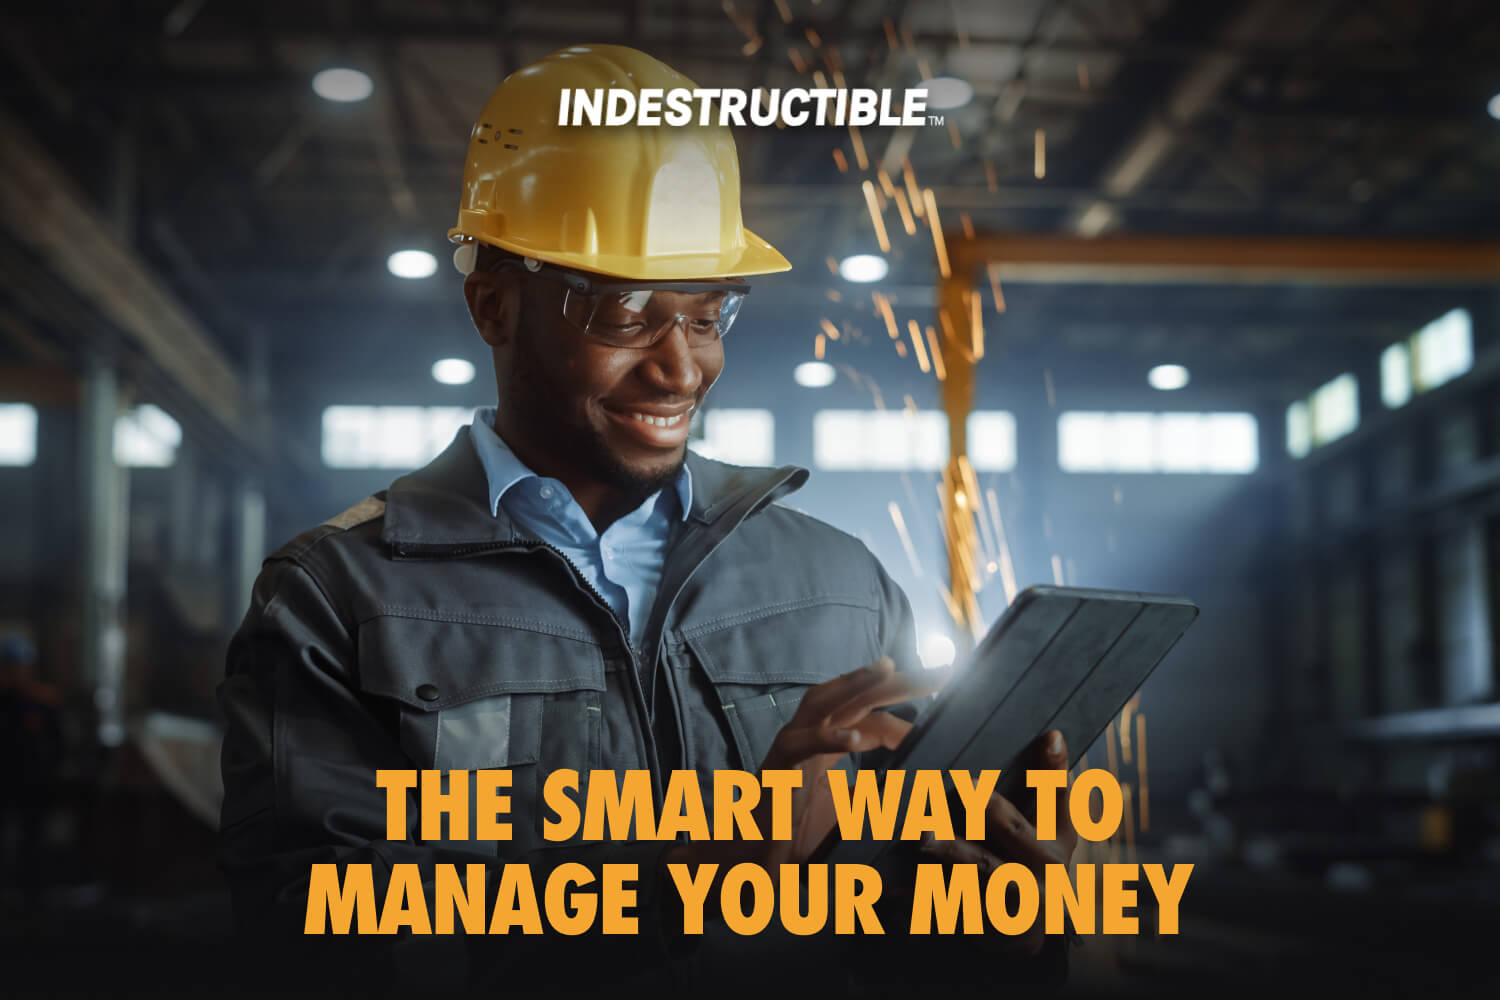 Making Your Money Work Smarter: How To Build Your Wealth Consistently